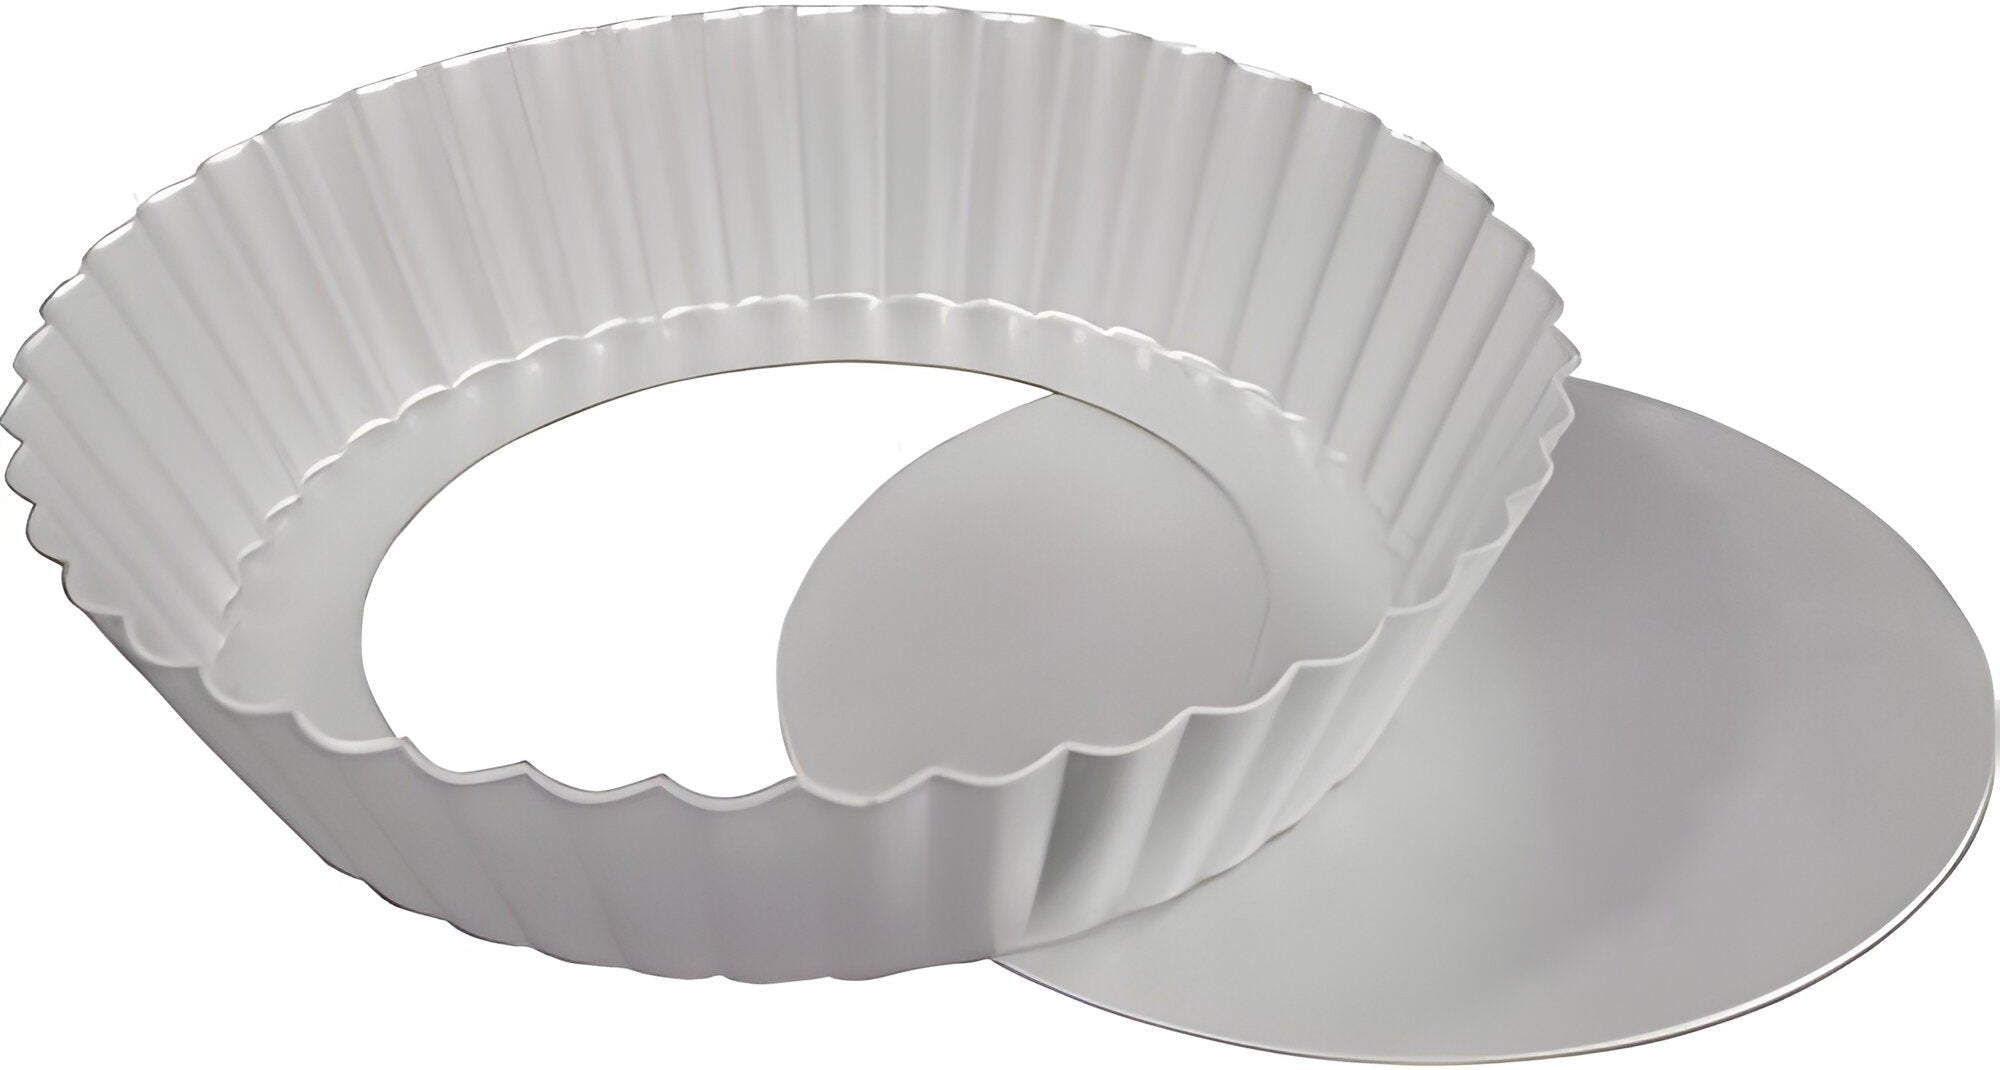 Fat Daddio's - 13.75" X 4.25" X 1" Aluminum Anodized Oblong Removable Bottom Fluted Tart Pan - PFT-1375